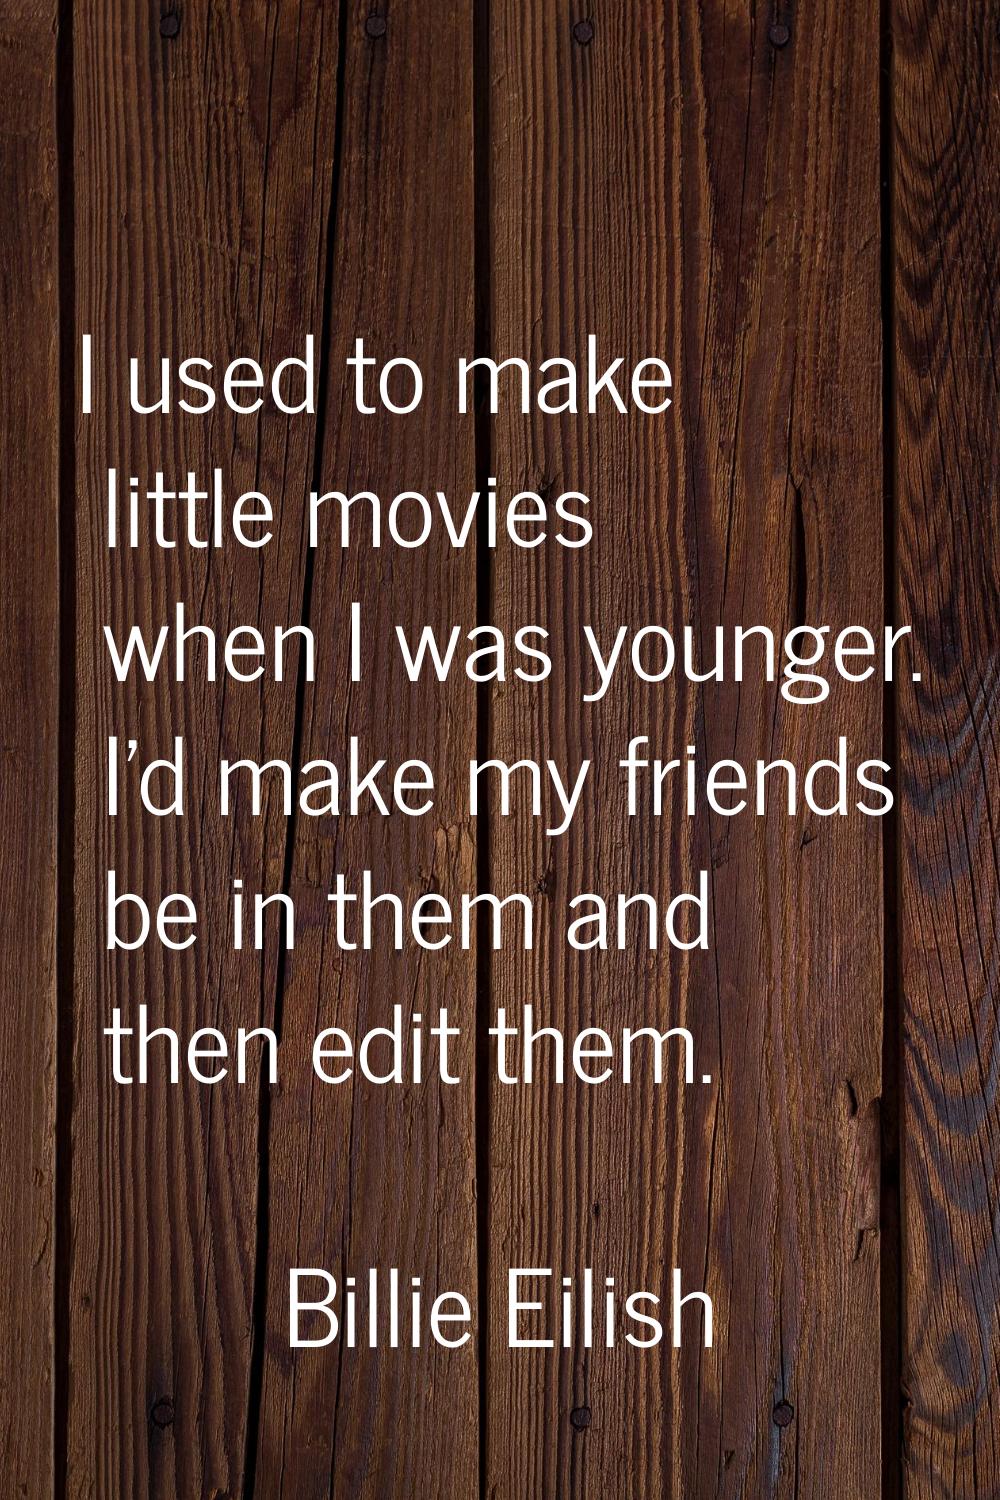 I used to make little movies when I was younger. I'd make my friends be in them and then edit them.